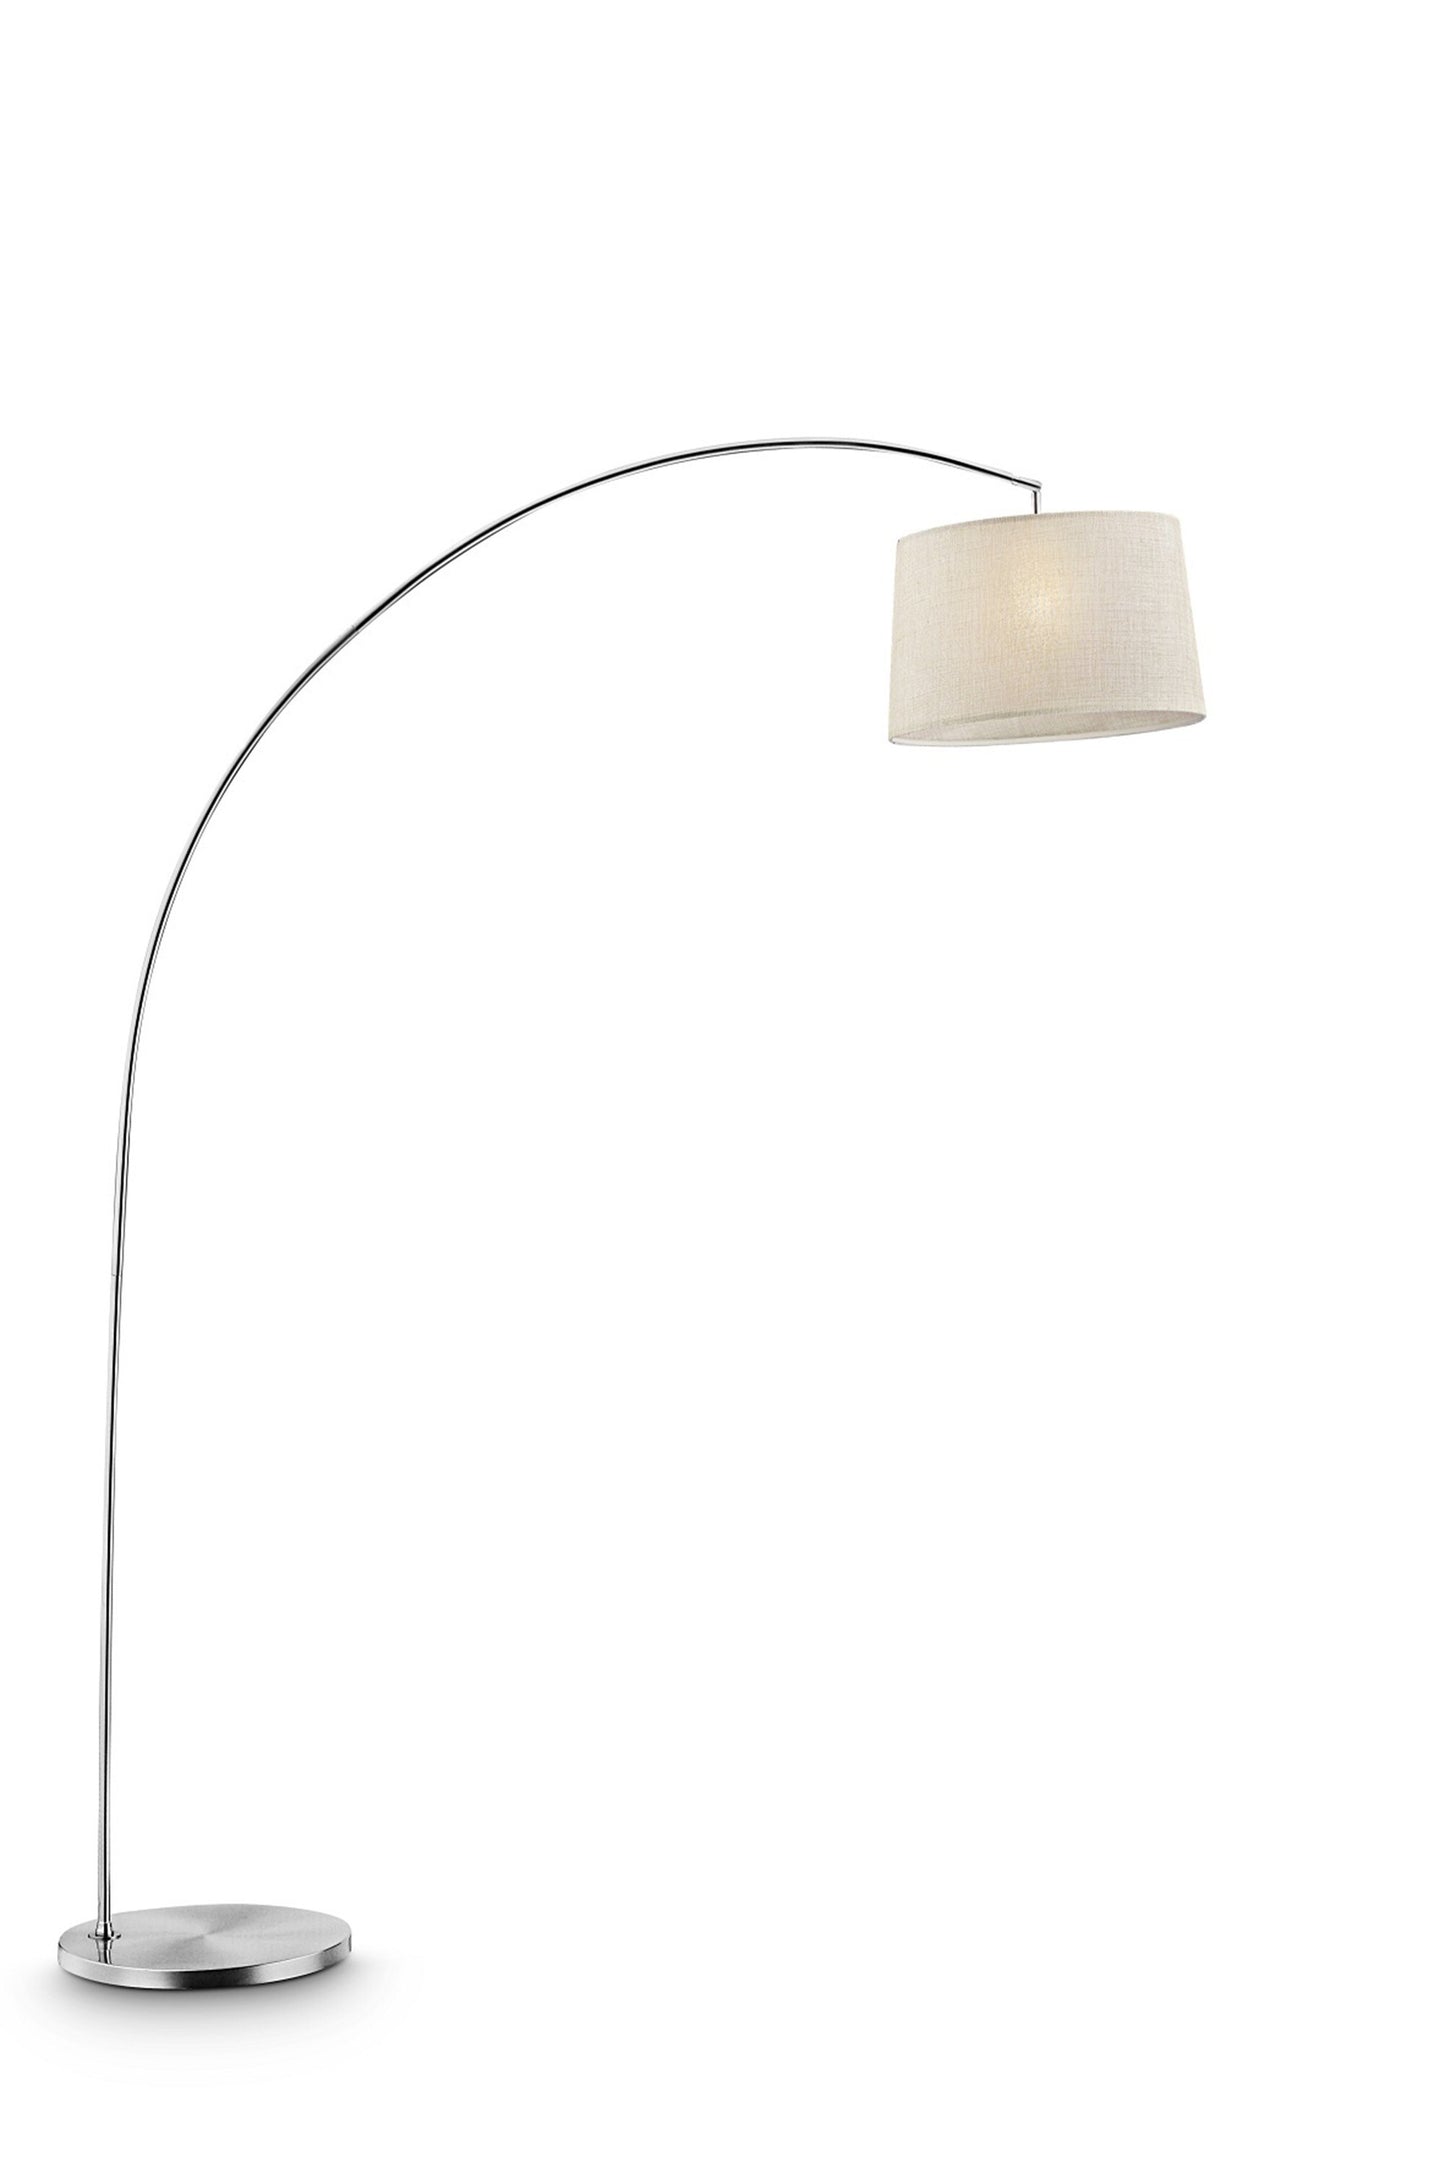 Silver Metal Arch Floor Lamp with Beige Fabric Shade